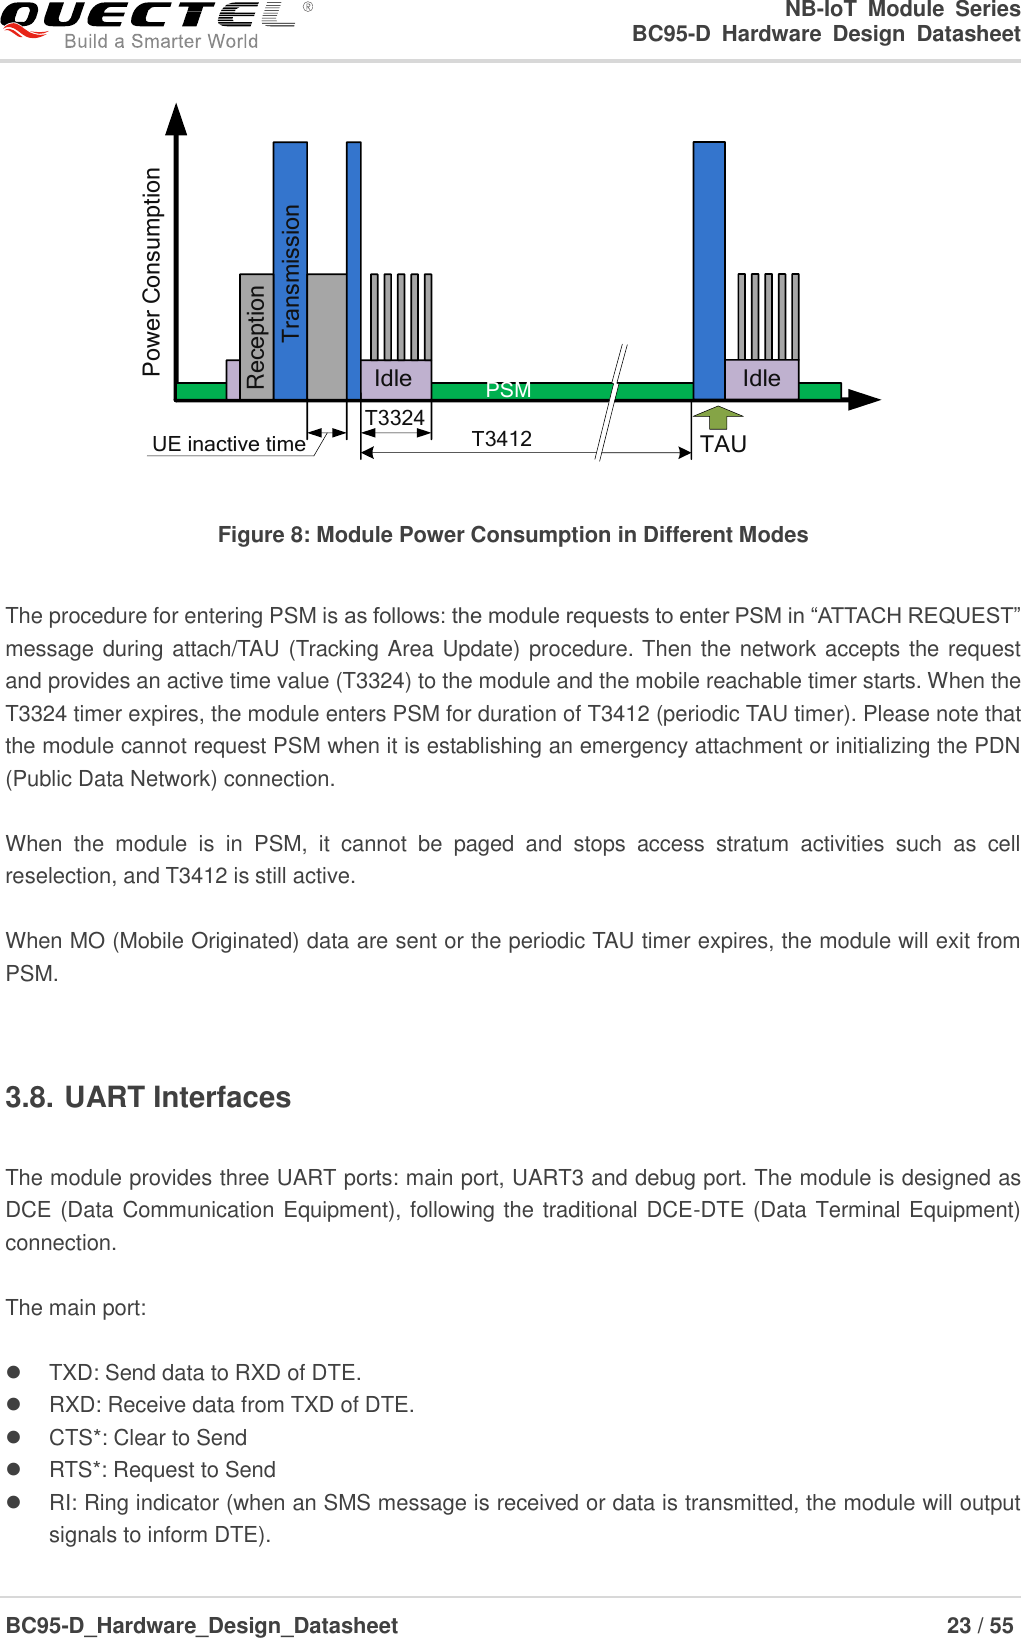                                                            NB-IoT  Module  Series                                                          BC95-D  Hardware  Design  Datasheet BC95-D_Hardware_Design_Datasheet                                                                    23 / 55    Power ConsumptionPSMIdleTransmissionReceptionT3324T3412 TAUUE inactive timeIdle Figure 8: Module Power Consumption in Different Modes  The procedure for entering PSM is as follows: the module requests to enter PSM in “ATTACH REQUEST” message during attach/TAU (Tracking Area Update) procedure. Then the network accepts the request and provides an active time value (T3324) to the module and the mobile reachable timer starts. When the T3324 timer expires, the module enters PSM for duration of T3412 (periodic TAU timer). Please note that the module cannot request PSM when it is establishing an emergency attachment or initializing the PDN (Public Data Network) connection.    When  the  module  is  in  PSM,  it  cannot  be  paged  and  stops  access  stratum  activities  such  as  cell reselection, and T3412 is still active.    When MO (Mobile Originated) data are sent or the periodic TAU timer expires, the module will exit from PSM.  3.8. UART Interfaces  The module provides three UART ports: main port, UART3 and debug port. The module is designed as DCE (Data Communication Equipment), following the traditional DCE-DTE (Data Terminal Equipment) connection.    The main port:    TXD: Send data to RXD of DTE.   RXD: Receive data from TXD of DTE.   CTS*: Clear to Send   RTS*: Request to Send   RI: Ring indicator (when an SMS message is received or data is transmitted, the module will output signals to inform DTE). 